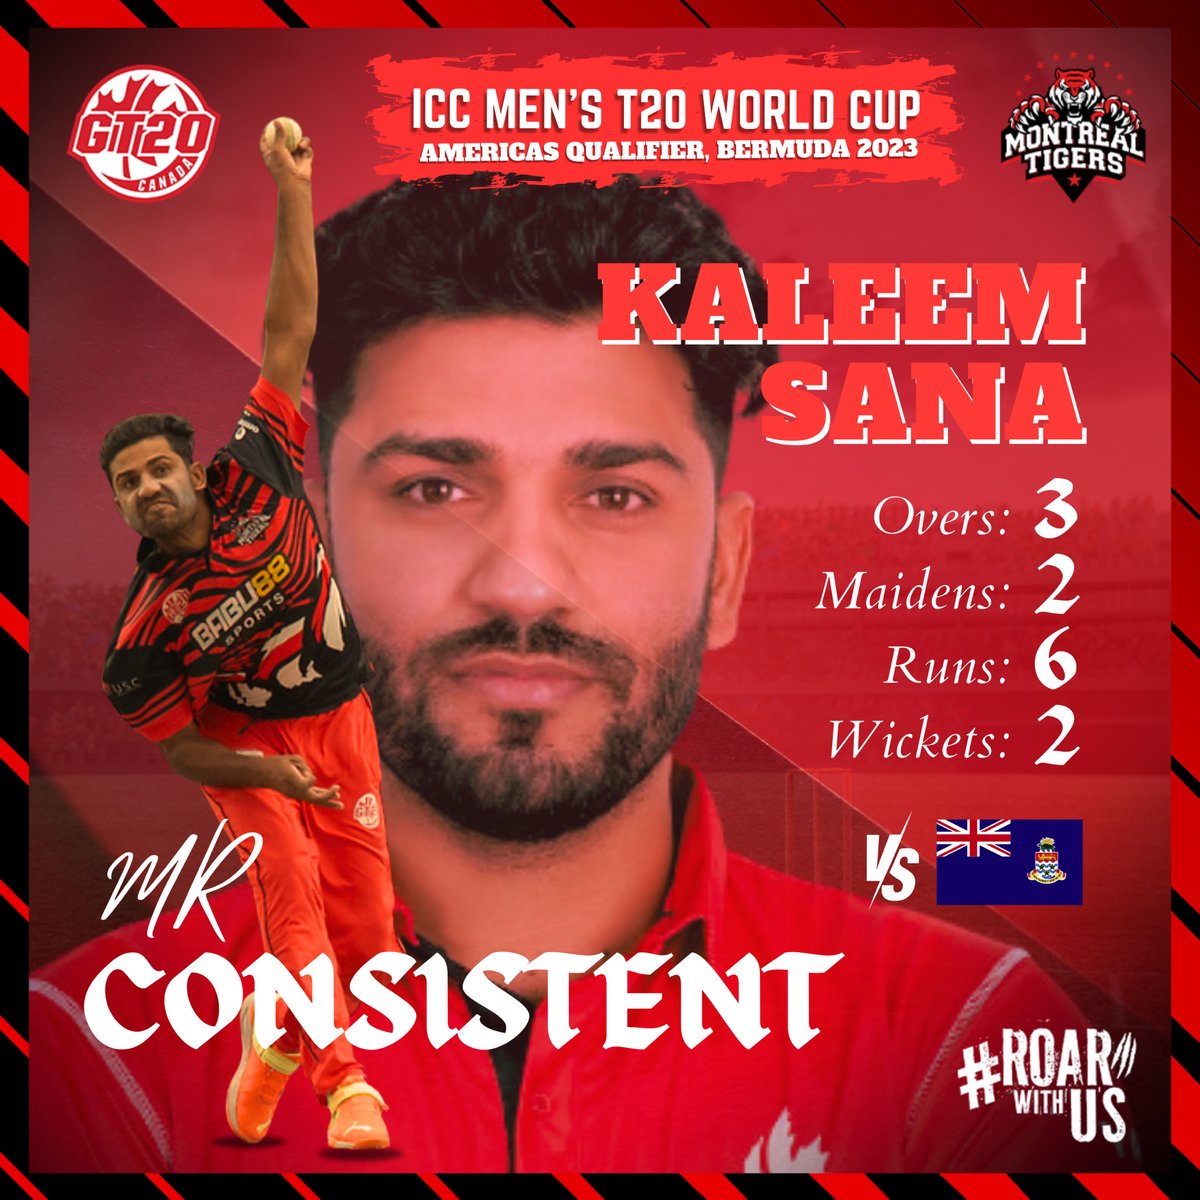 ✨ Kaleem Sana does it again! Taking 2️⃣ wickets in just 3️⃣ overs with 2️⃣ maidens against Cayman Islands in the 2nd match of the T20 World Cup Qualifier. 🇨🇦💪 

#montrealtigers #gt20canada #roarwithus #cricketcanada #CricketVictory #KaleemSana #T20WorldCupQualifier